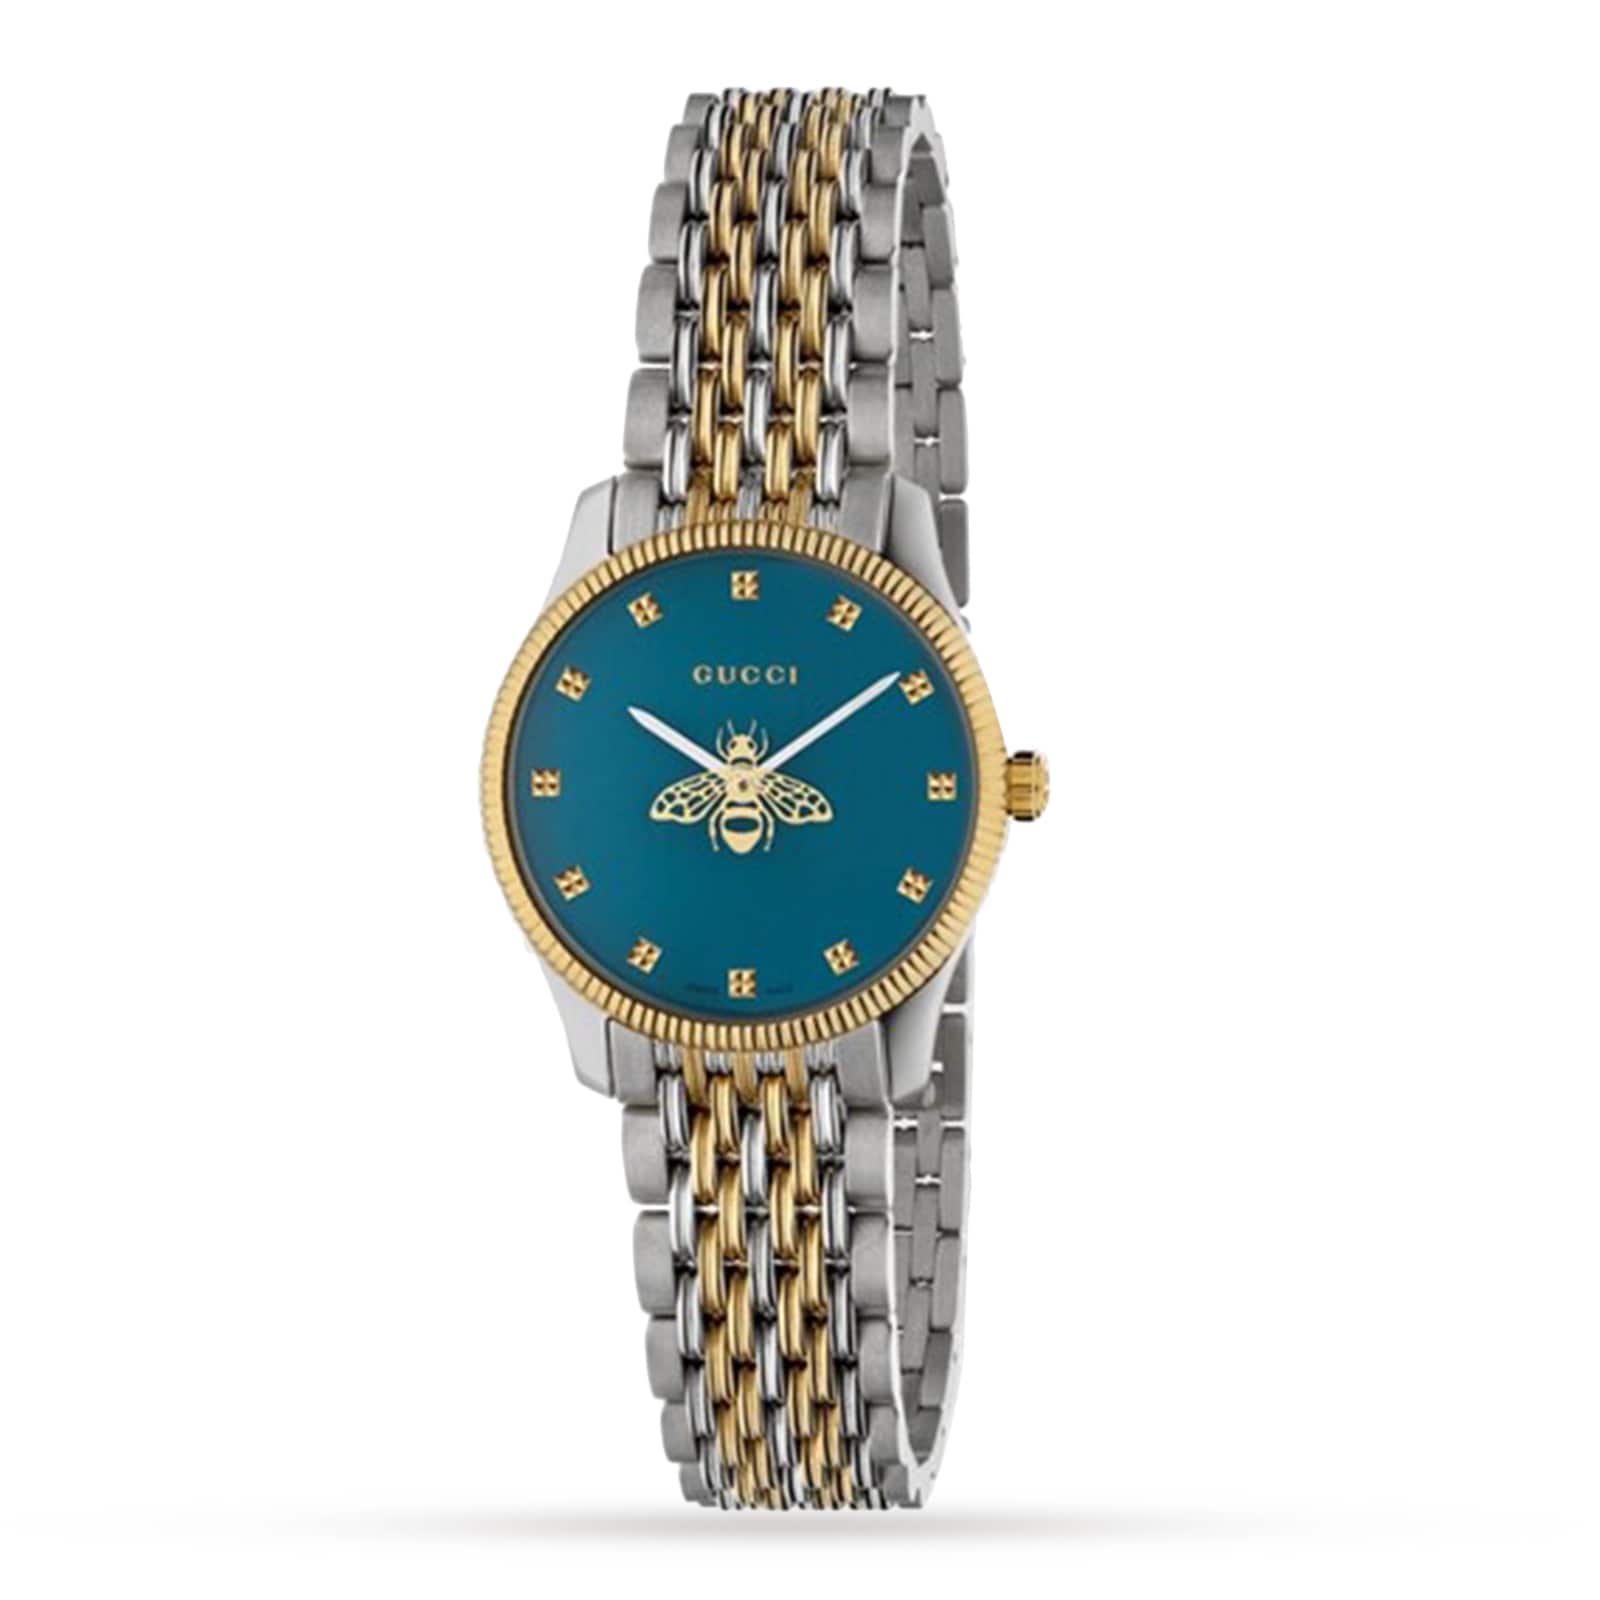 Gucci Watches, Gold Diamond Gucci Watches for Men & Women for Sale UK |  Goldsmiths